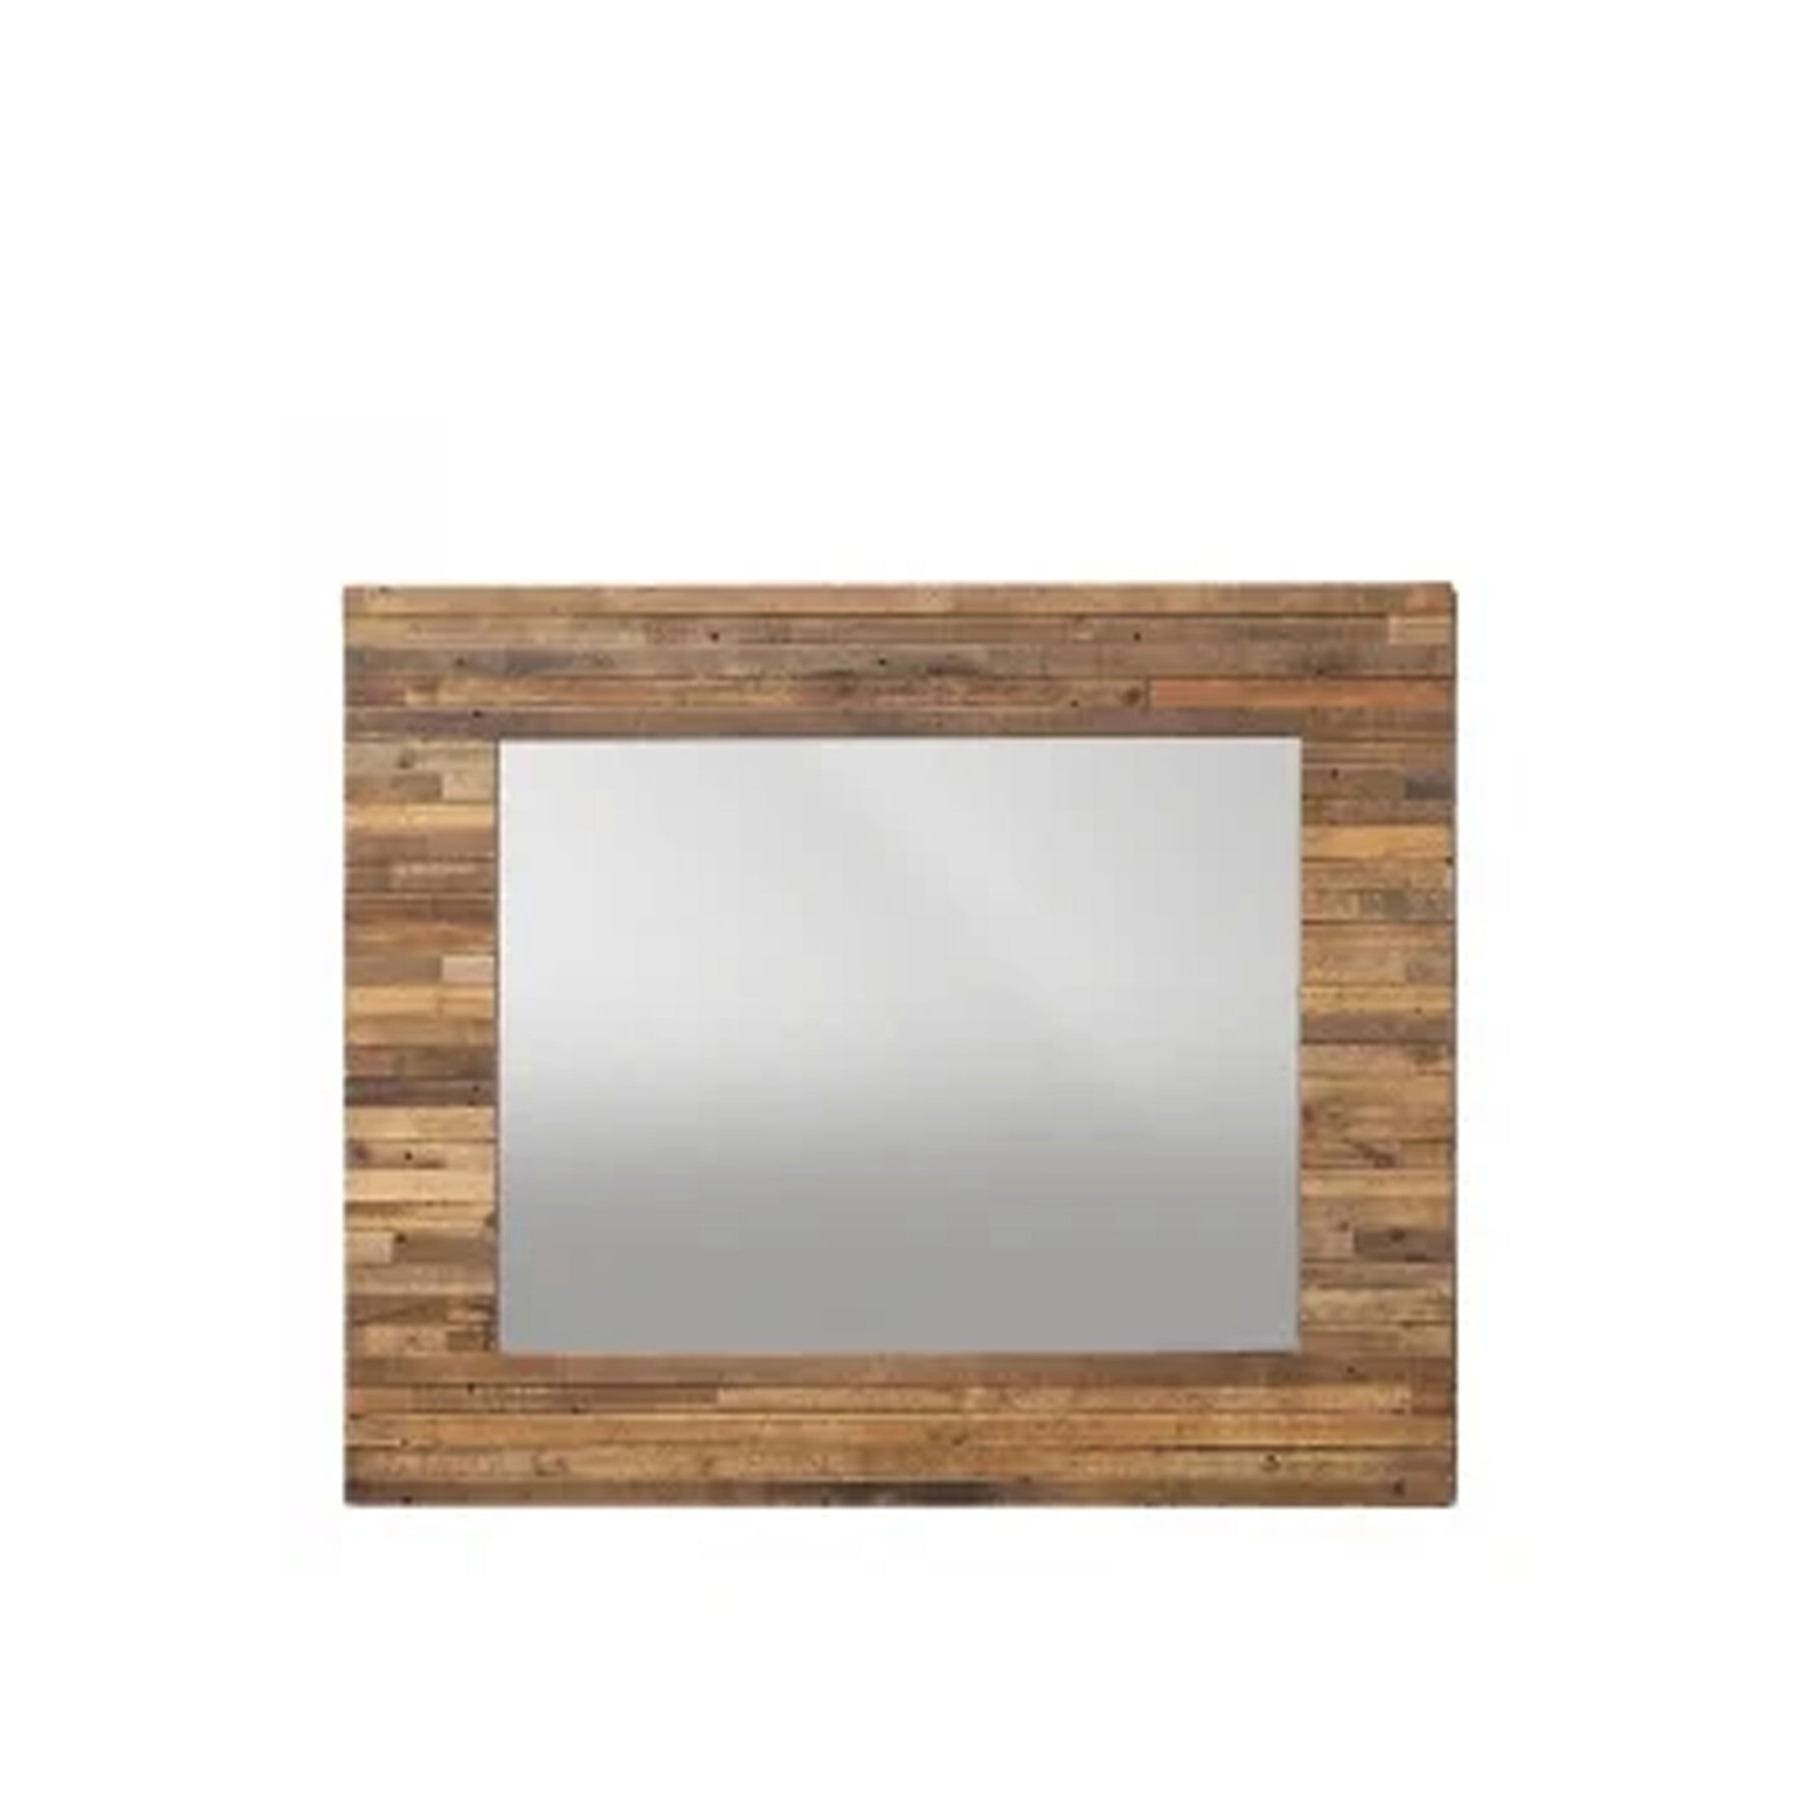 Barker and Stonehouse Charlie Reclaimed Wood Rectangular Wall Mirror Brown - image 1